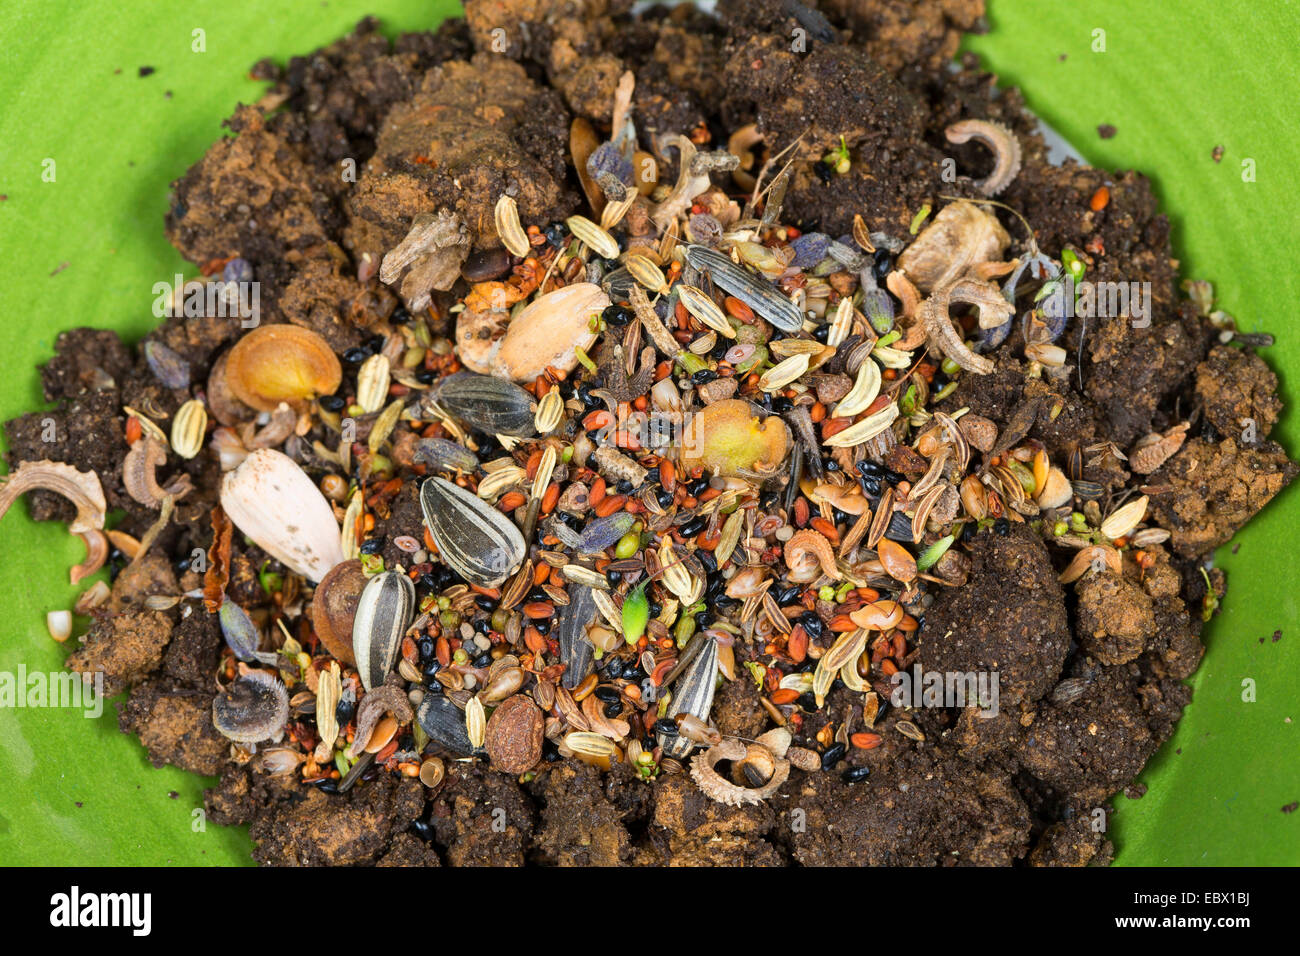 different seeds, fruits ans soil in a bowl for making a seedbomb, Germany Stock Photo